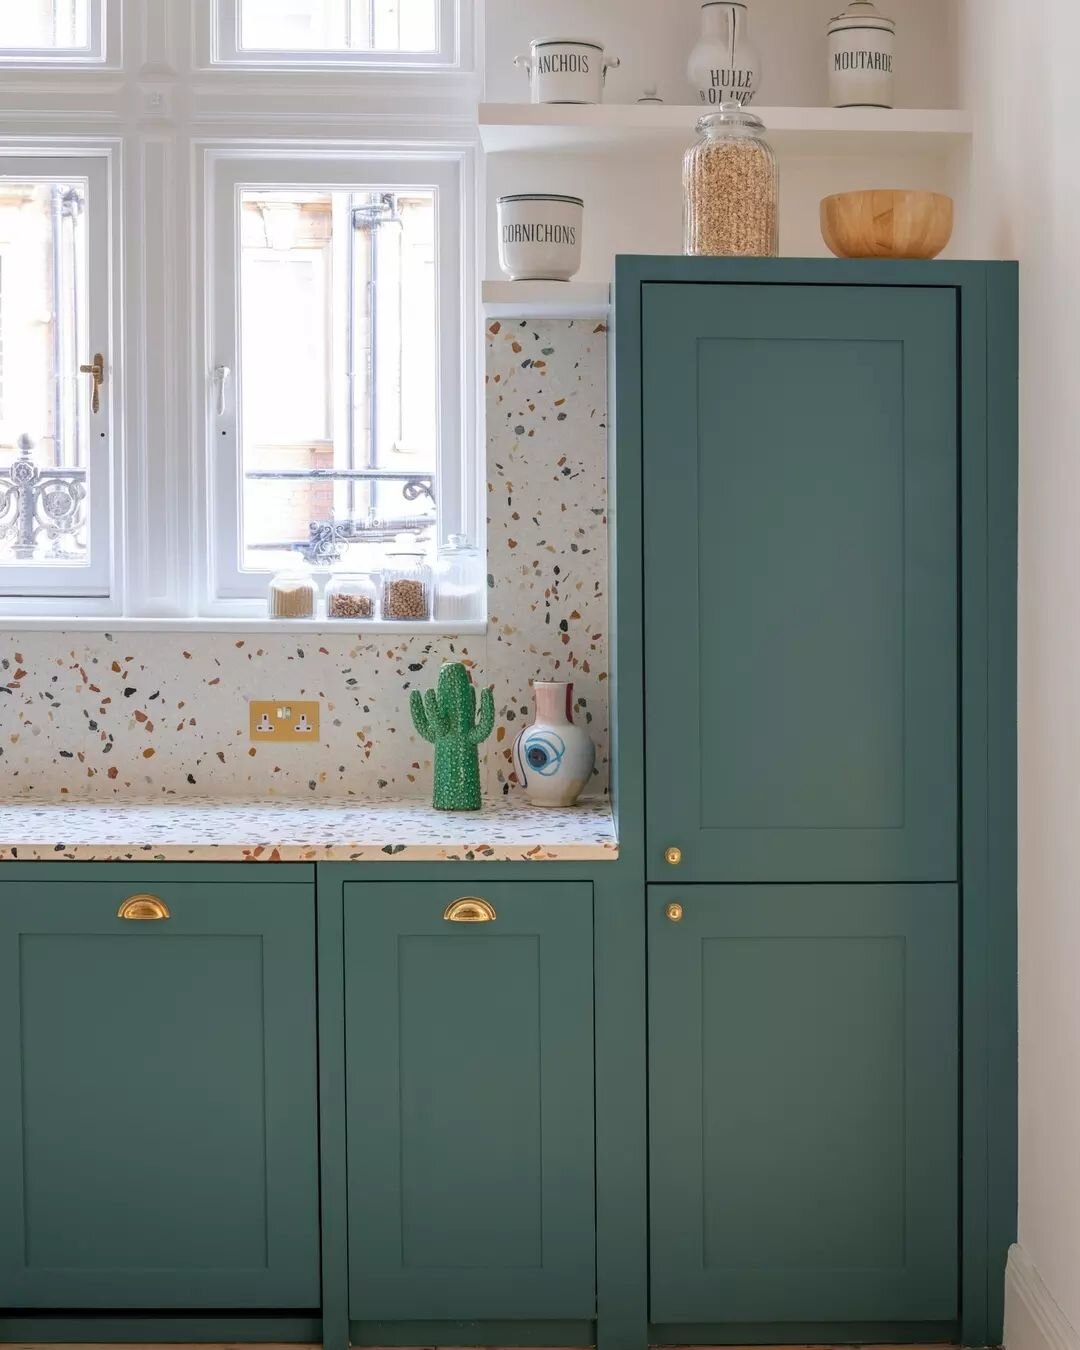 For this playful kitchen design we went bold and painted the units a beautiful deep teal tone. We balanced these hues with multi-coloured honed terrazzo and cherry on top beautiful brass handles 😍